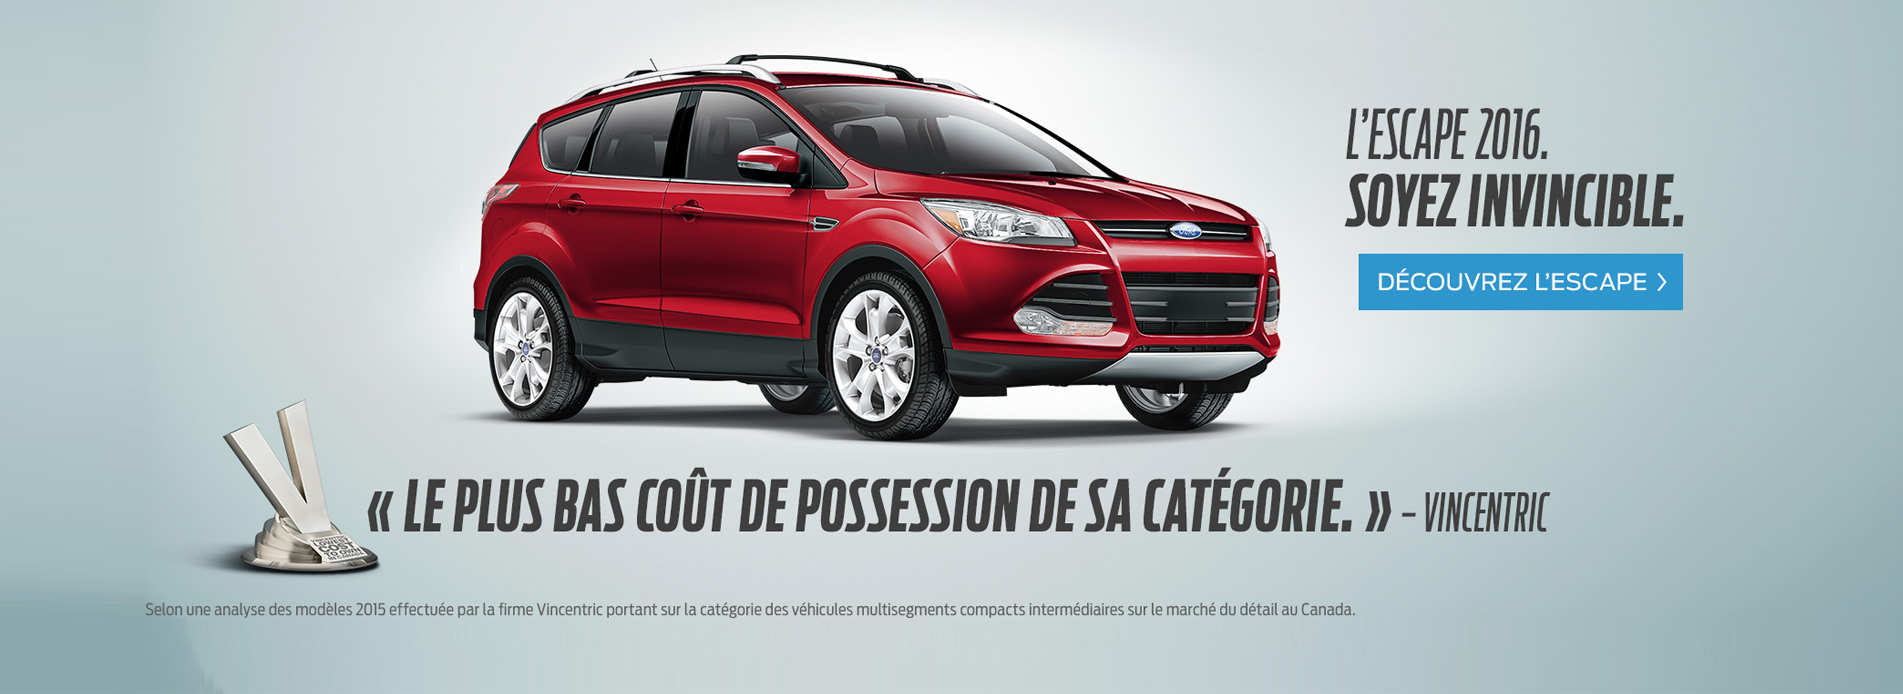 Venne ford concessionnaire #9